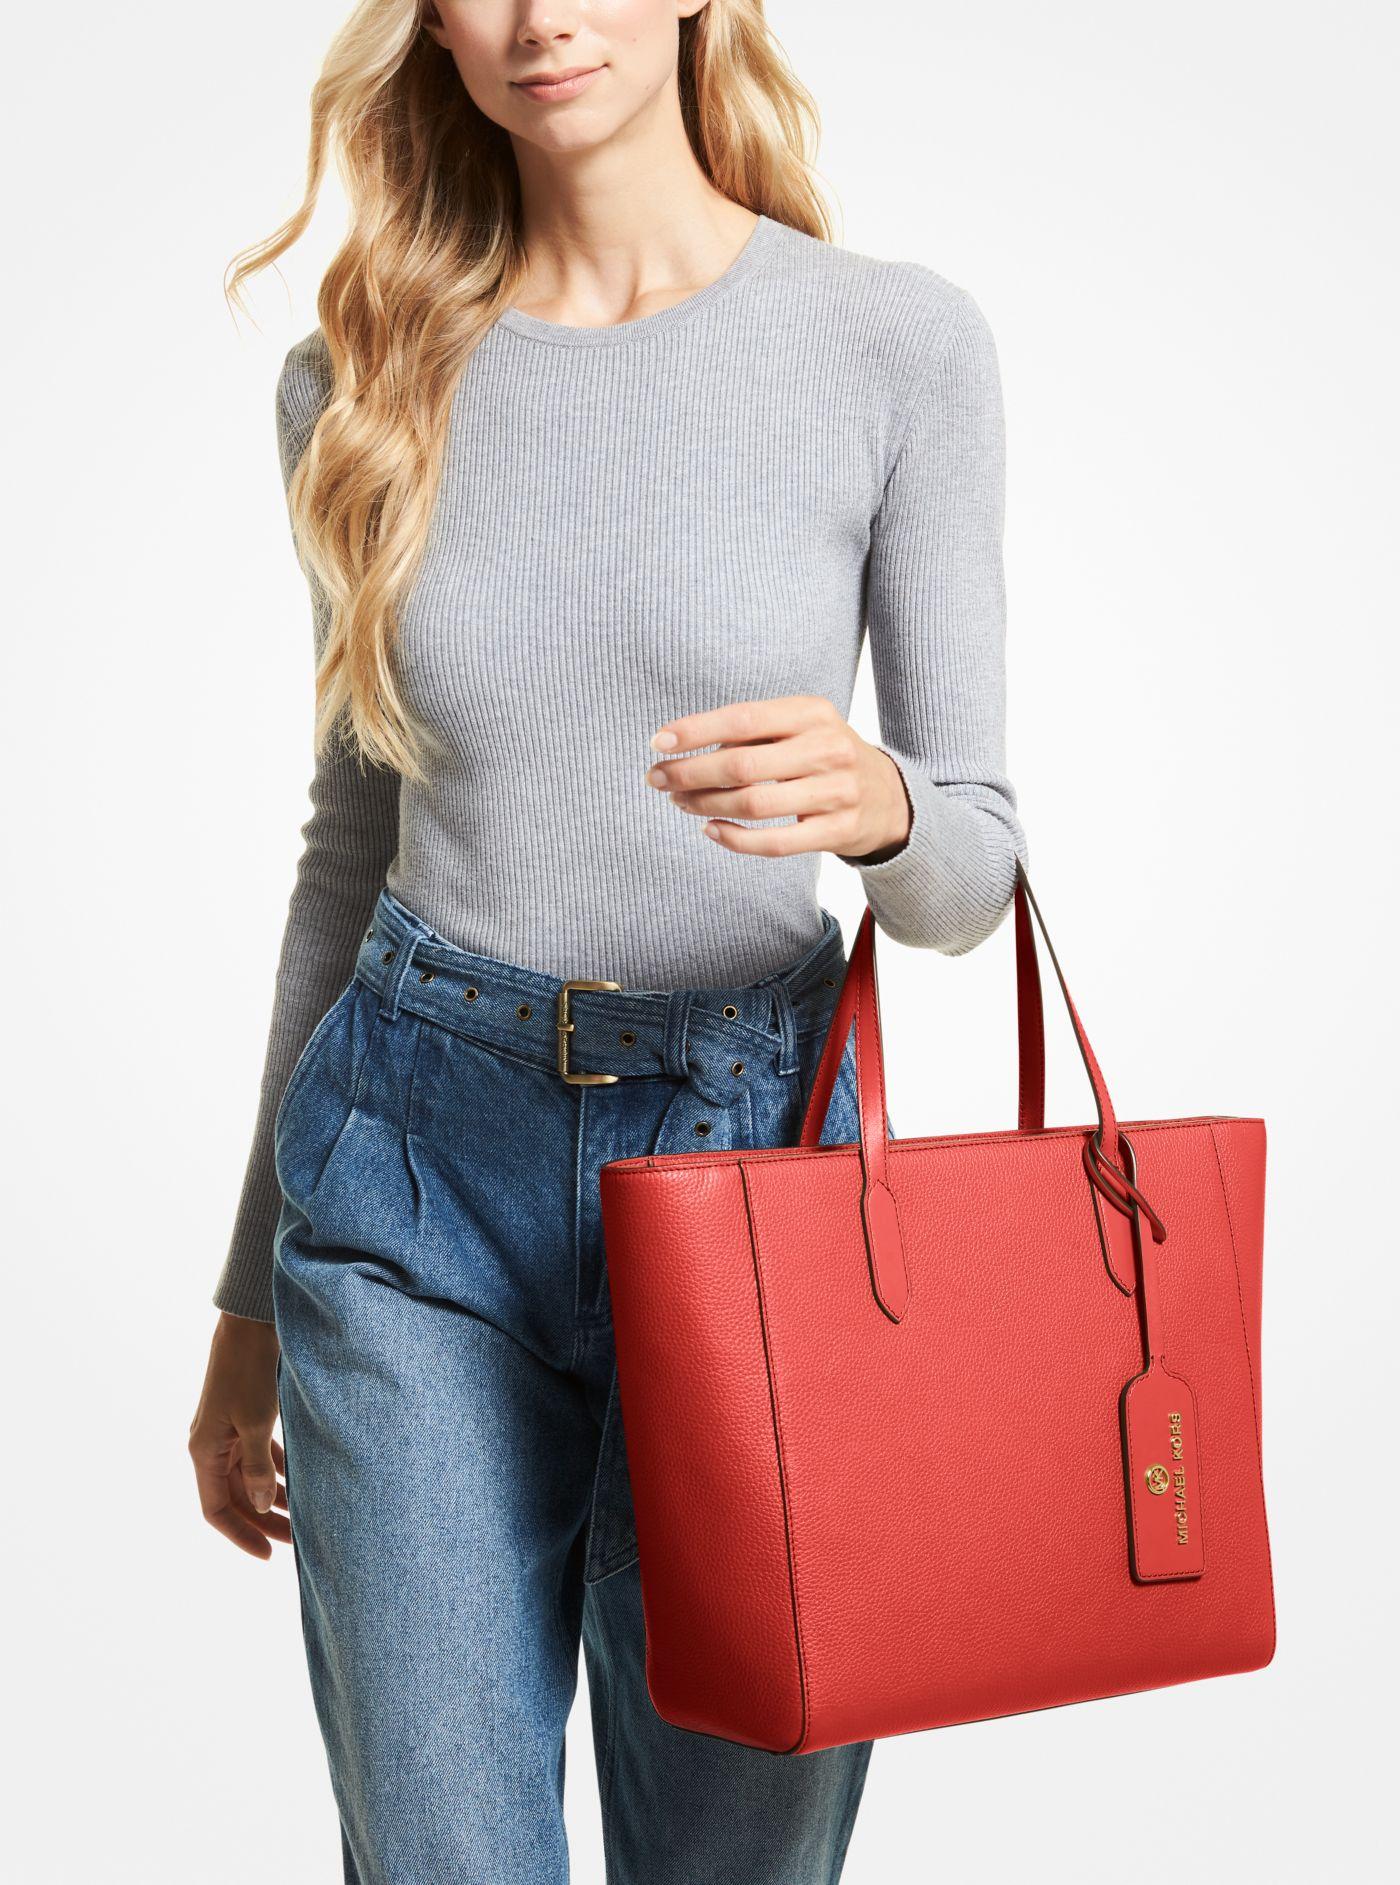 Michael Kors Sinclair Large Pebbled Leather Tote Bag in Red | Lyst